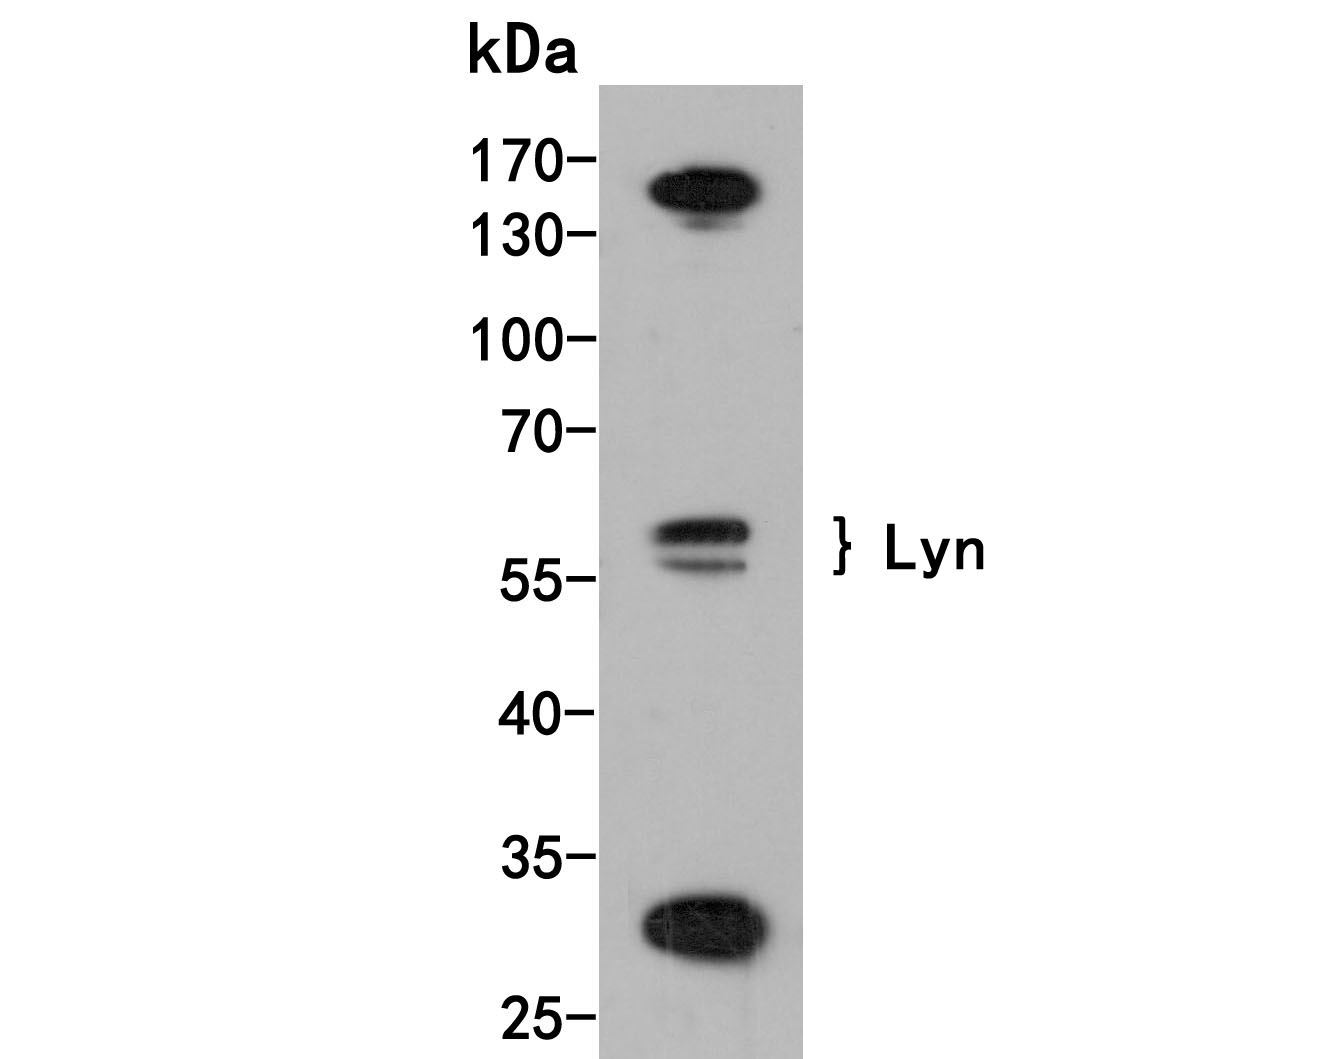 Western blot analysis of Lyn on rat brain tissue lysates. Proteins were transferred to a PVDF membrane and blocked with 5% BSA in PBS for 1 hour at room temperature. The primary antibody (HA500142, 1/1,000) was used in 5% BSA at room temperature for 2 hours. Goat Anti-Rabbit IgG - HRP Secondary Antibody (HA1001) at 1:200,000 dilution was used for 1 hour at room temperature.